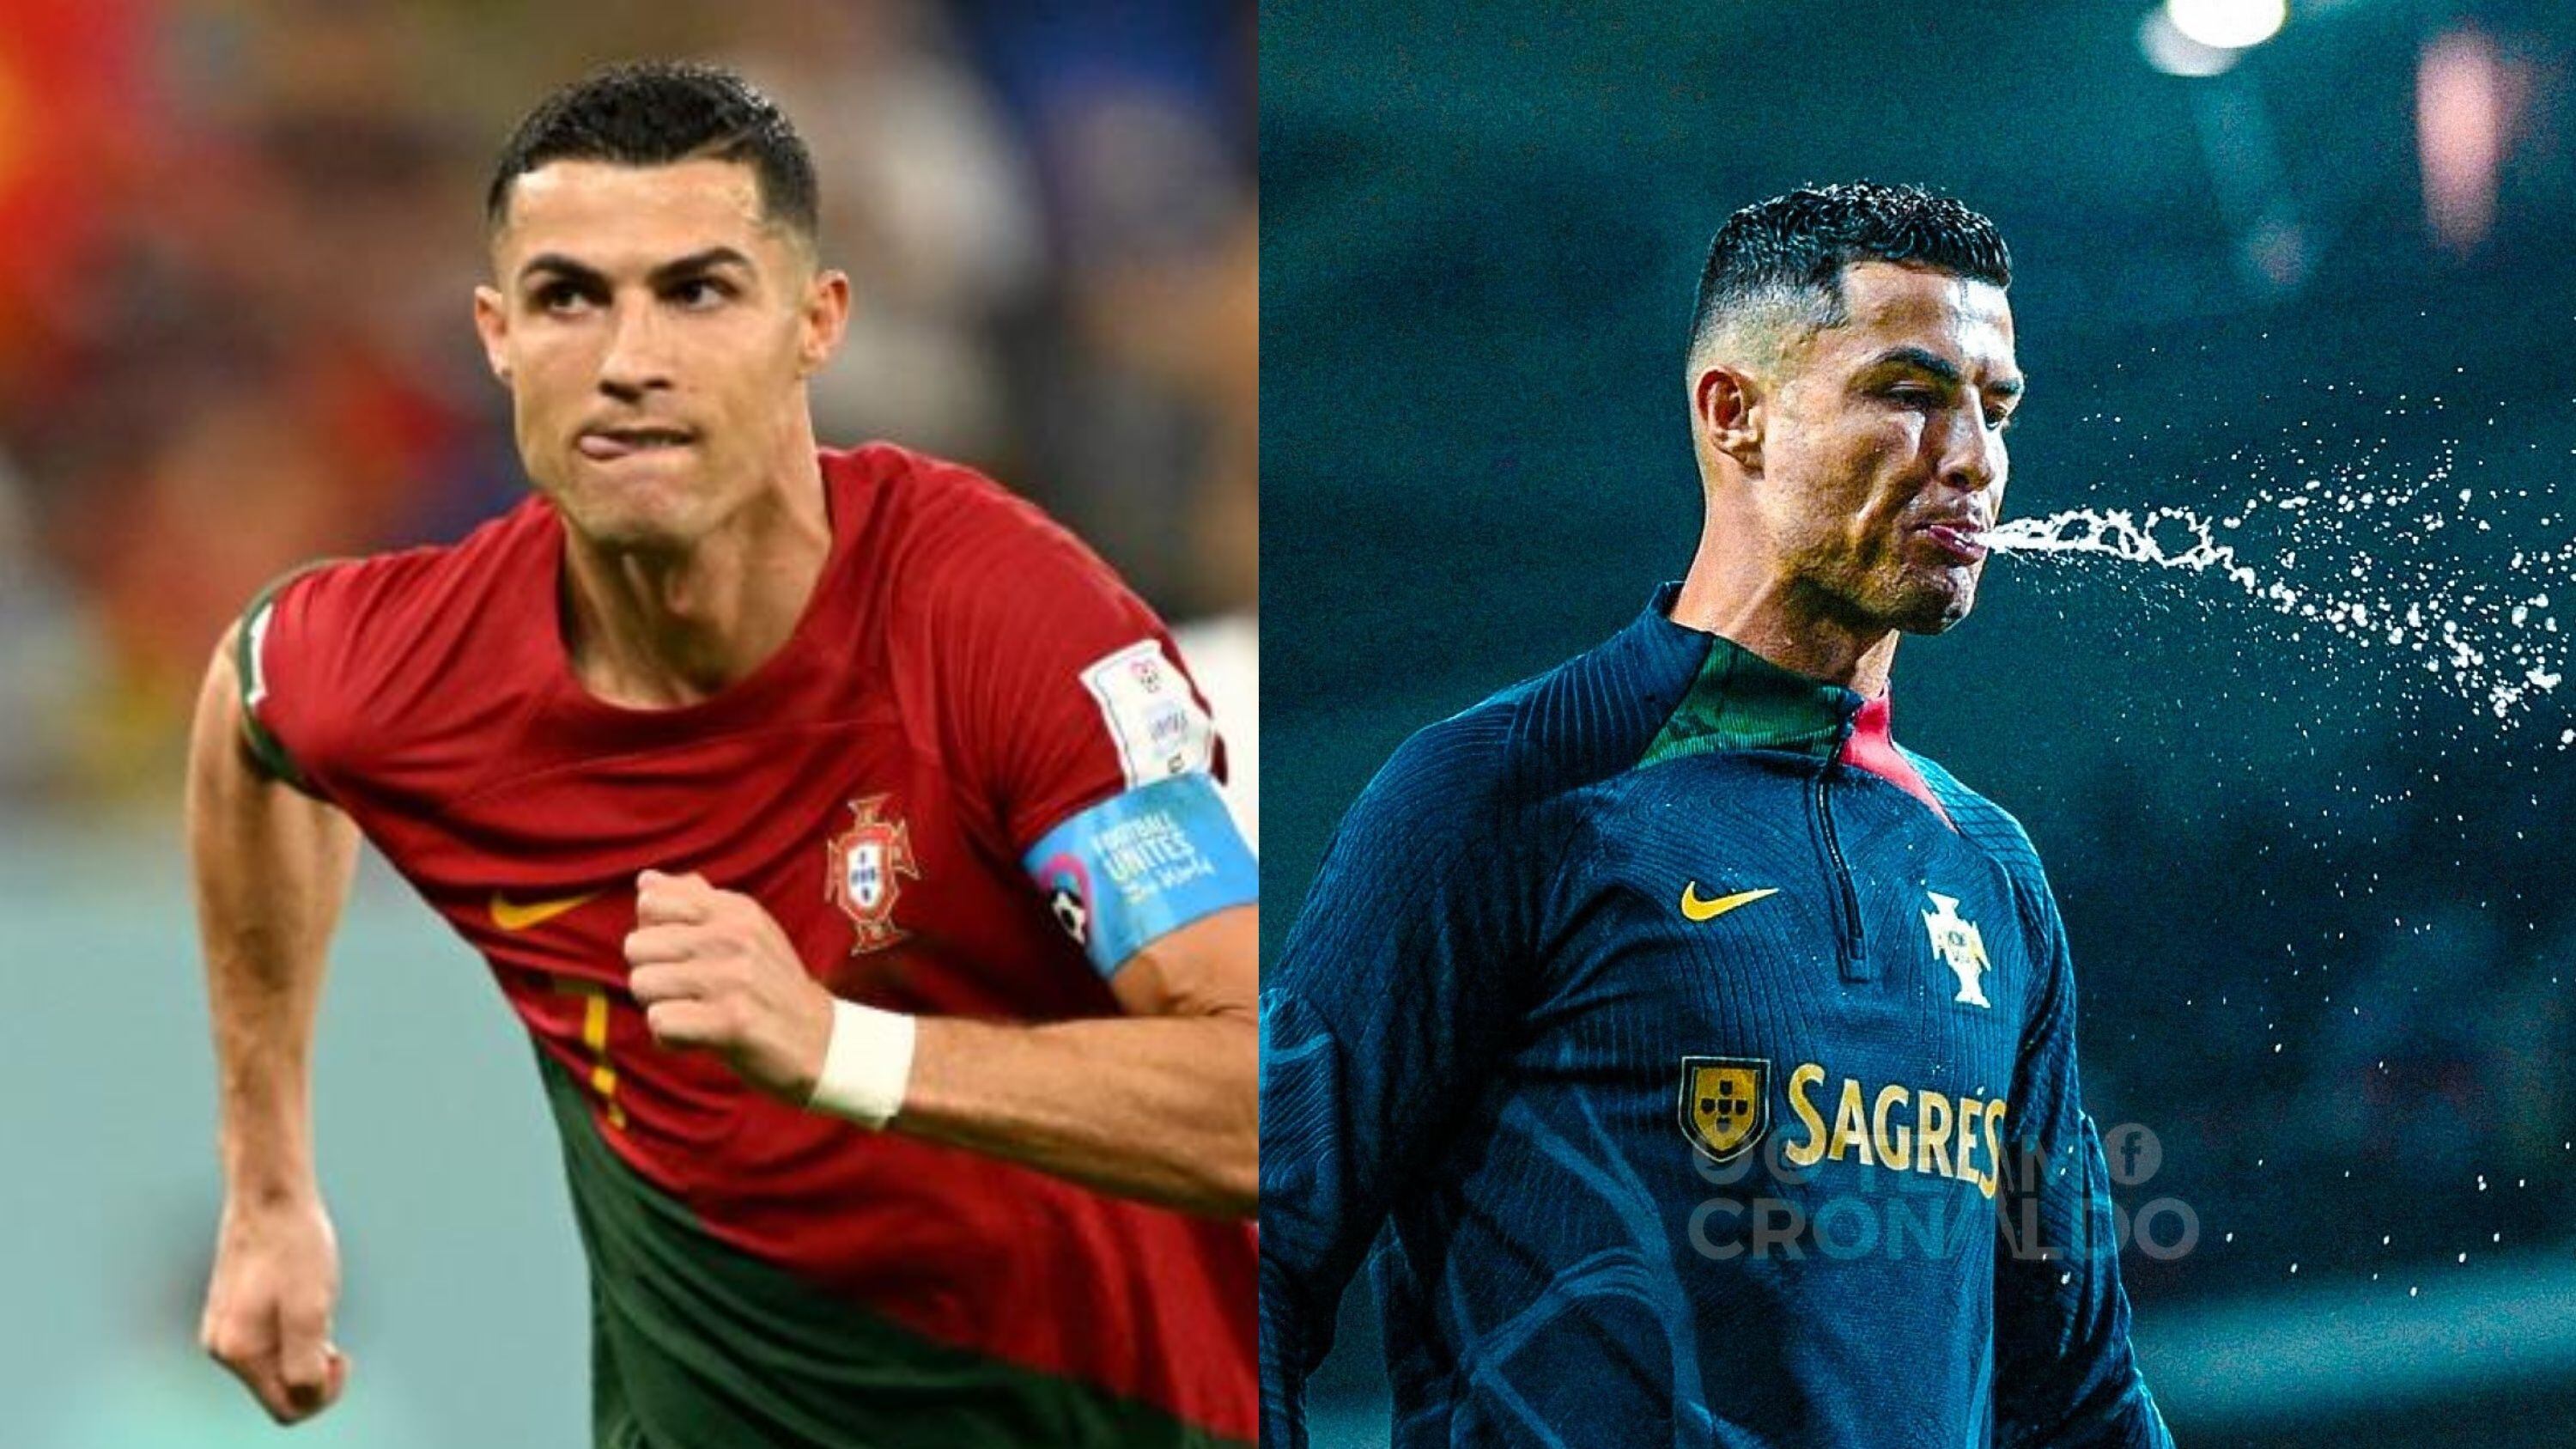 With Cristiano Ronaldo, this is the starting lineup for Portugal vs Slovakia